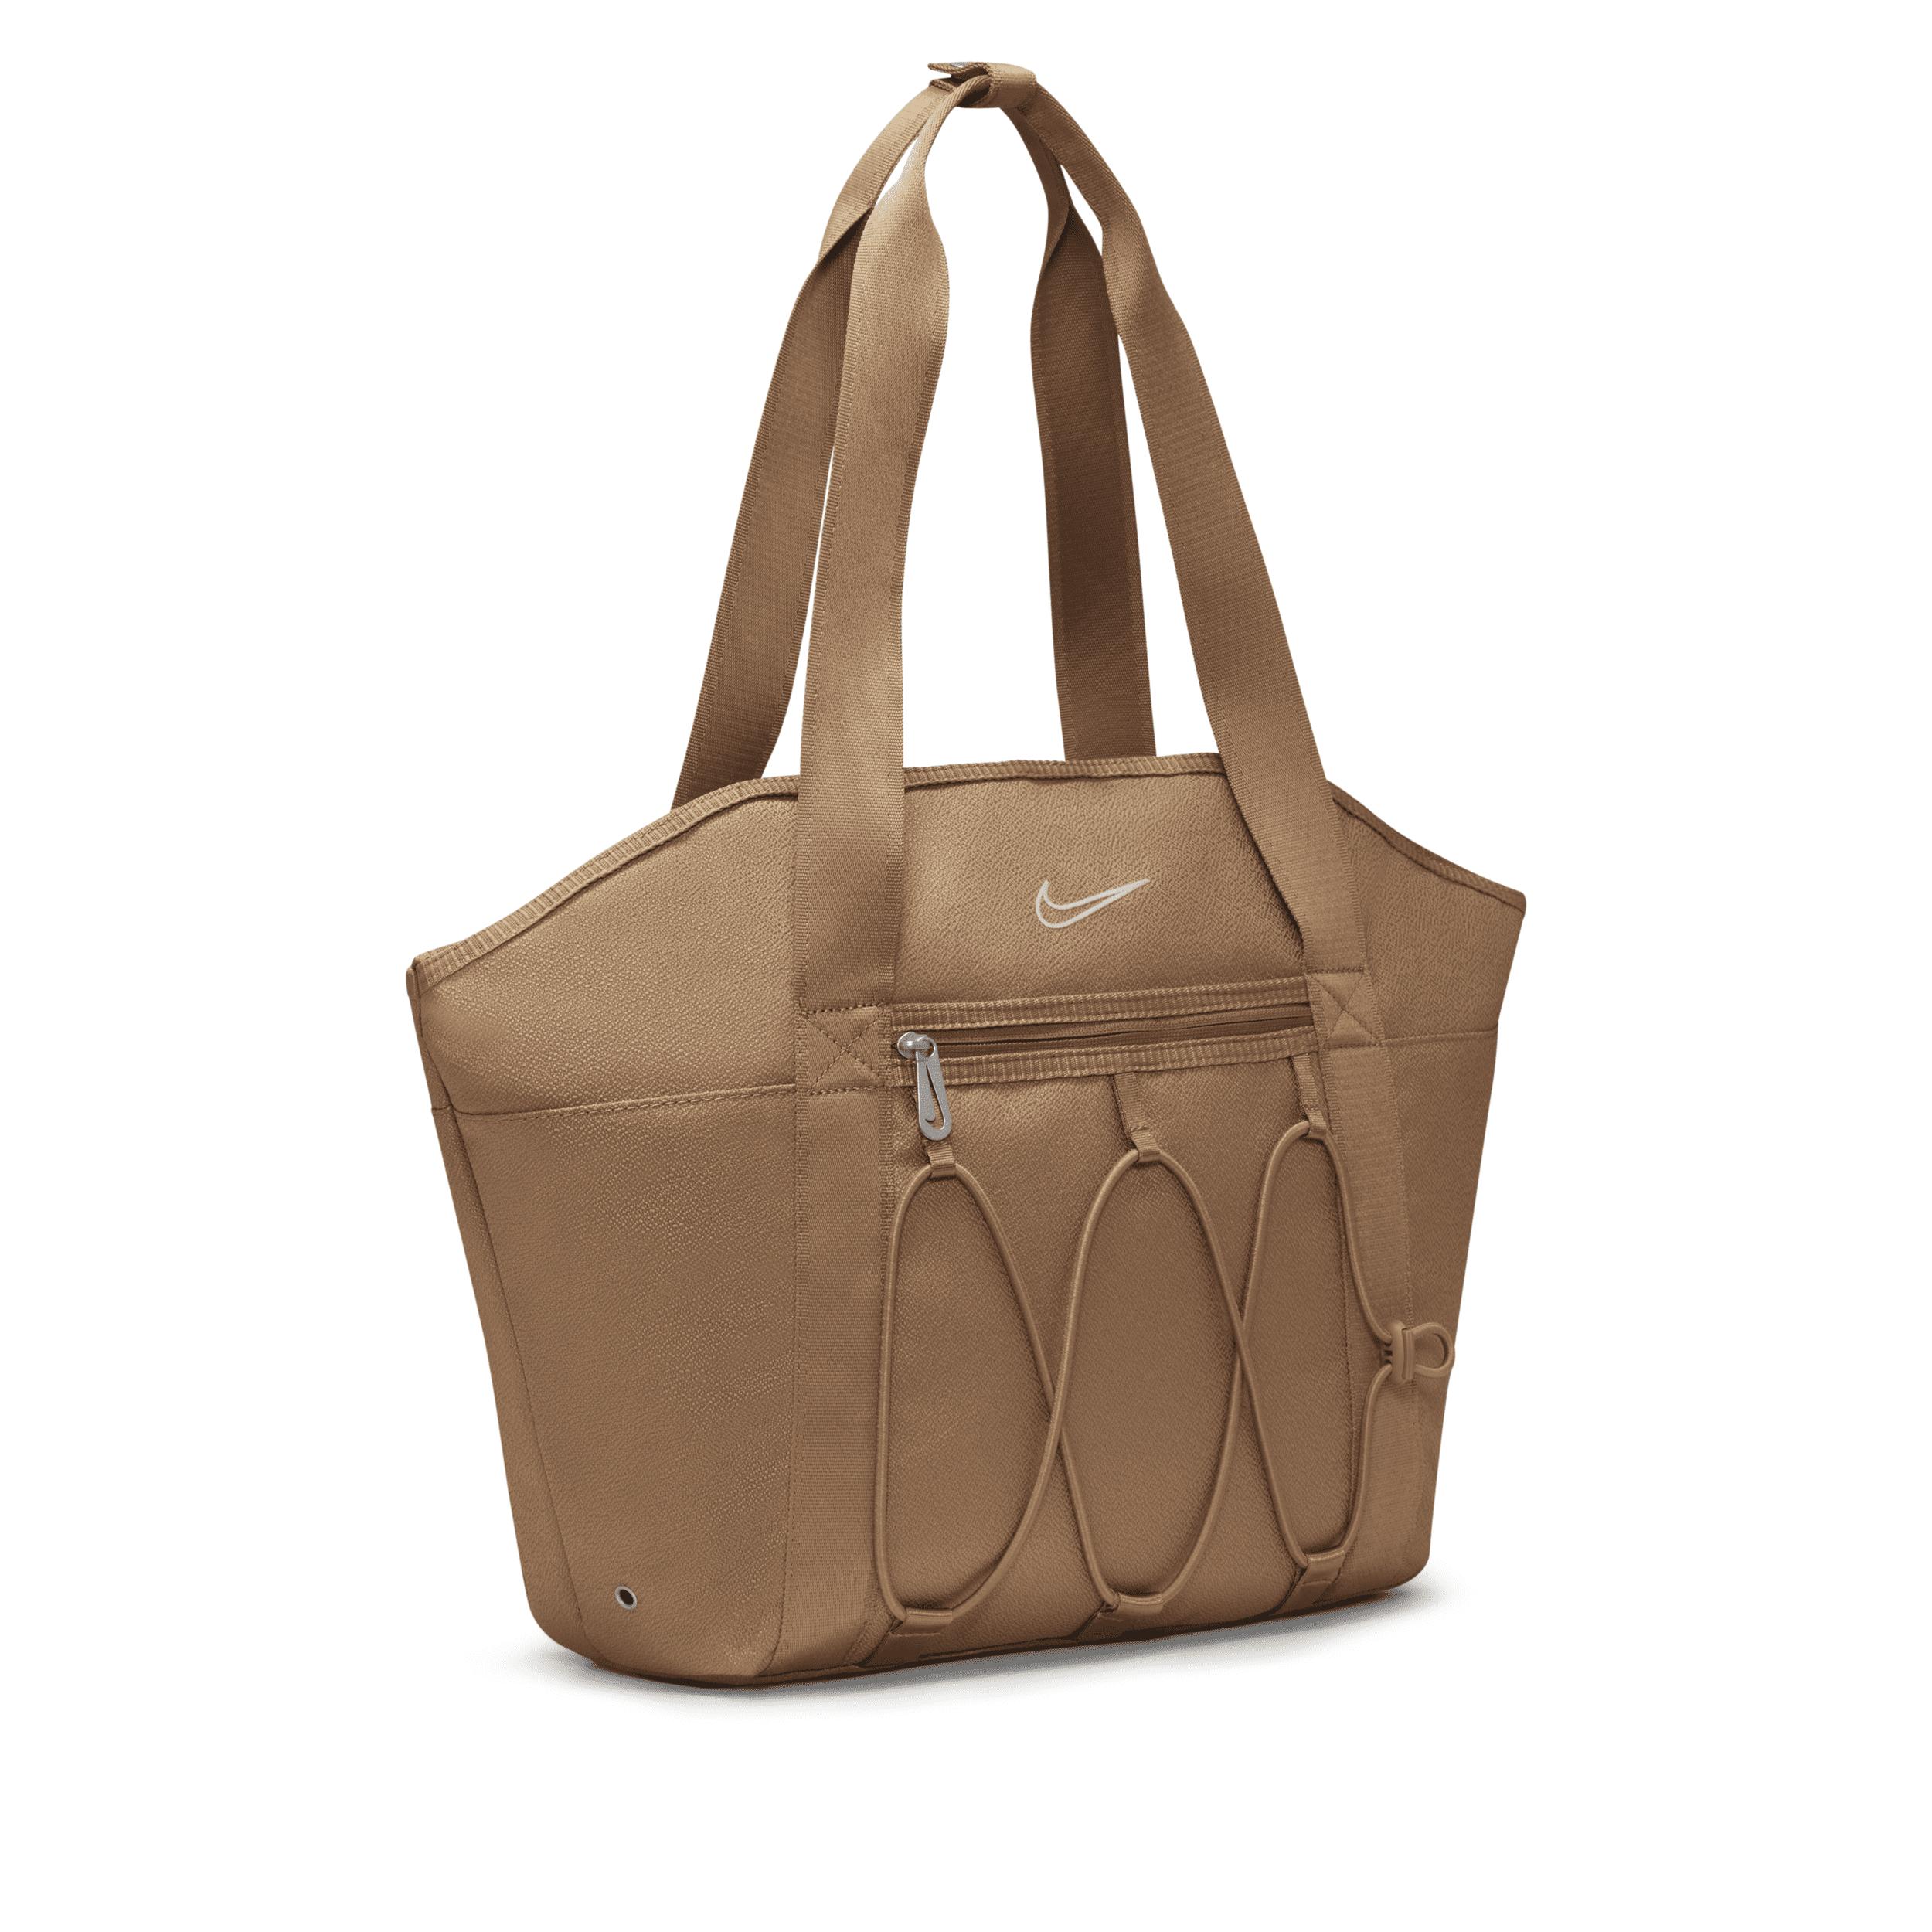 Nike One Training Tote Bag in Brown | Lyst